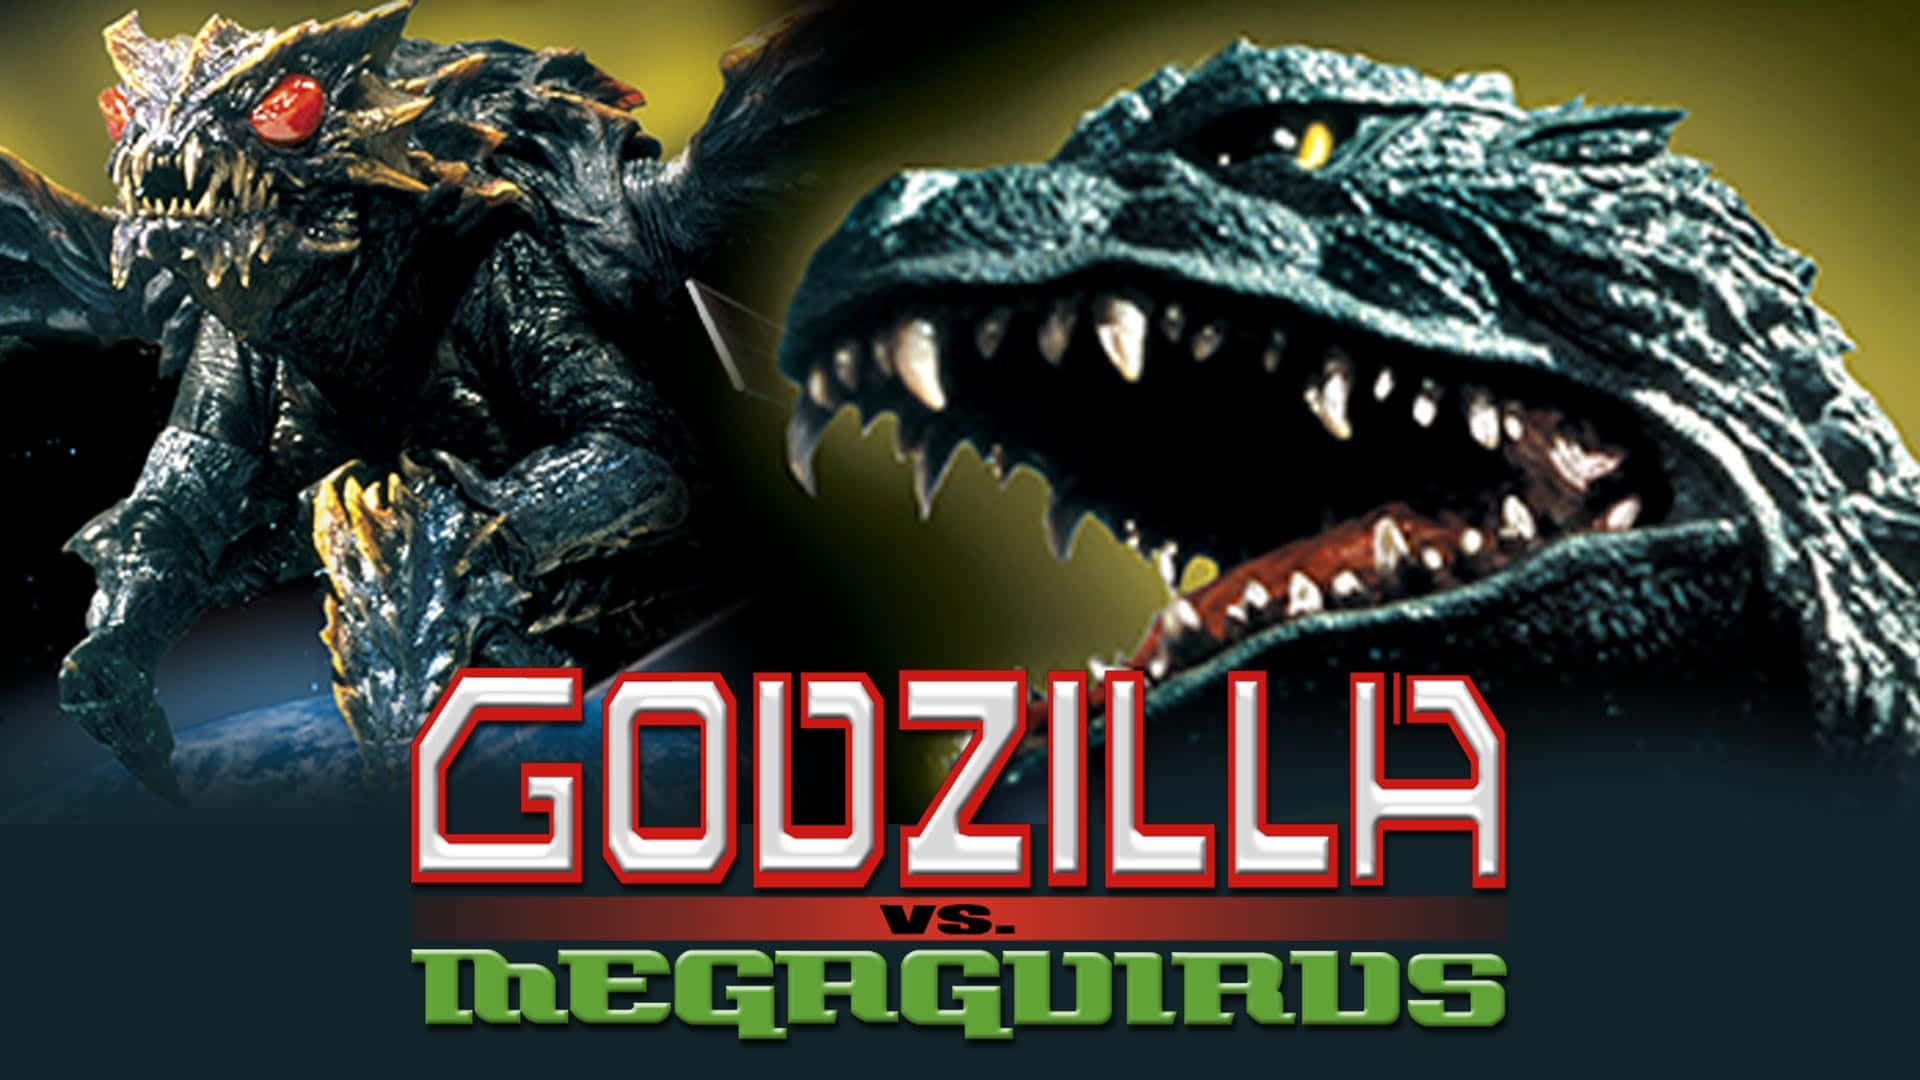 Godzilla and Megaguirus Face-Off in an Epic Battle Wallpaper